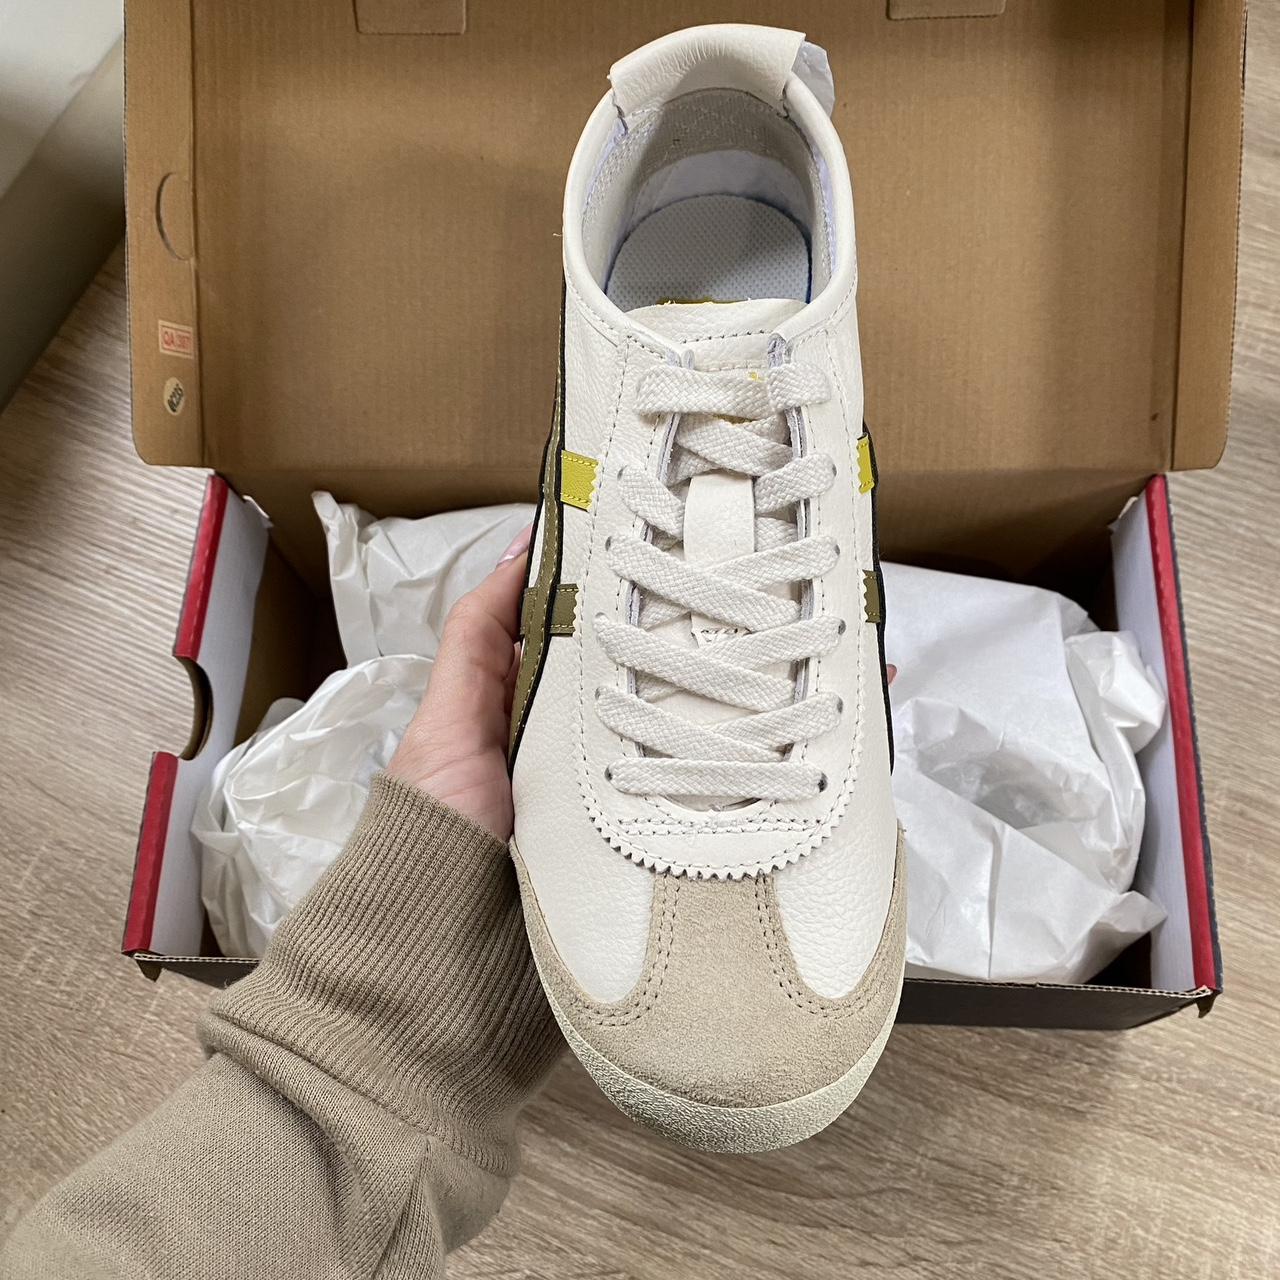 New Onitsuka Tiger Mexico 66 ASICS in Cream... - Depop